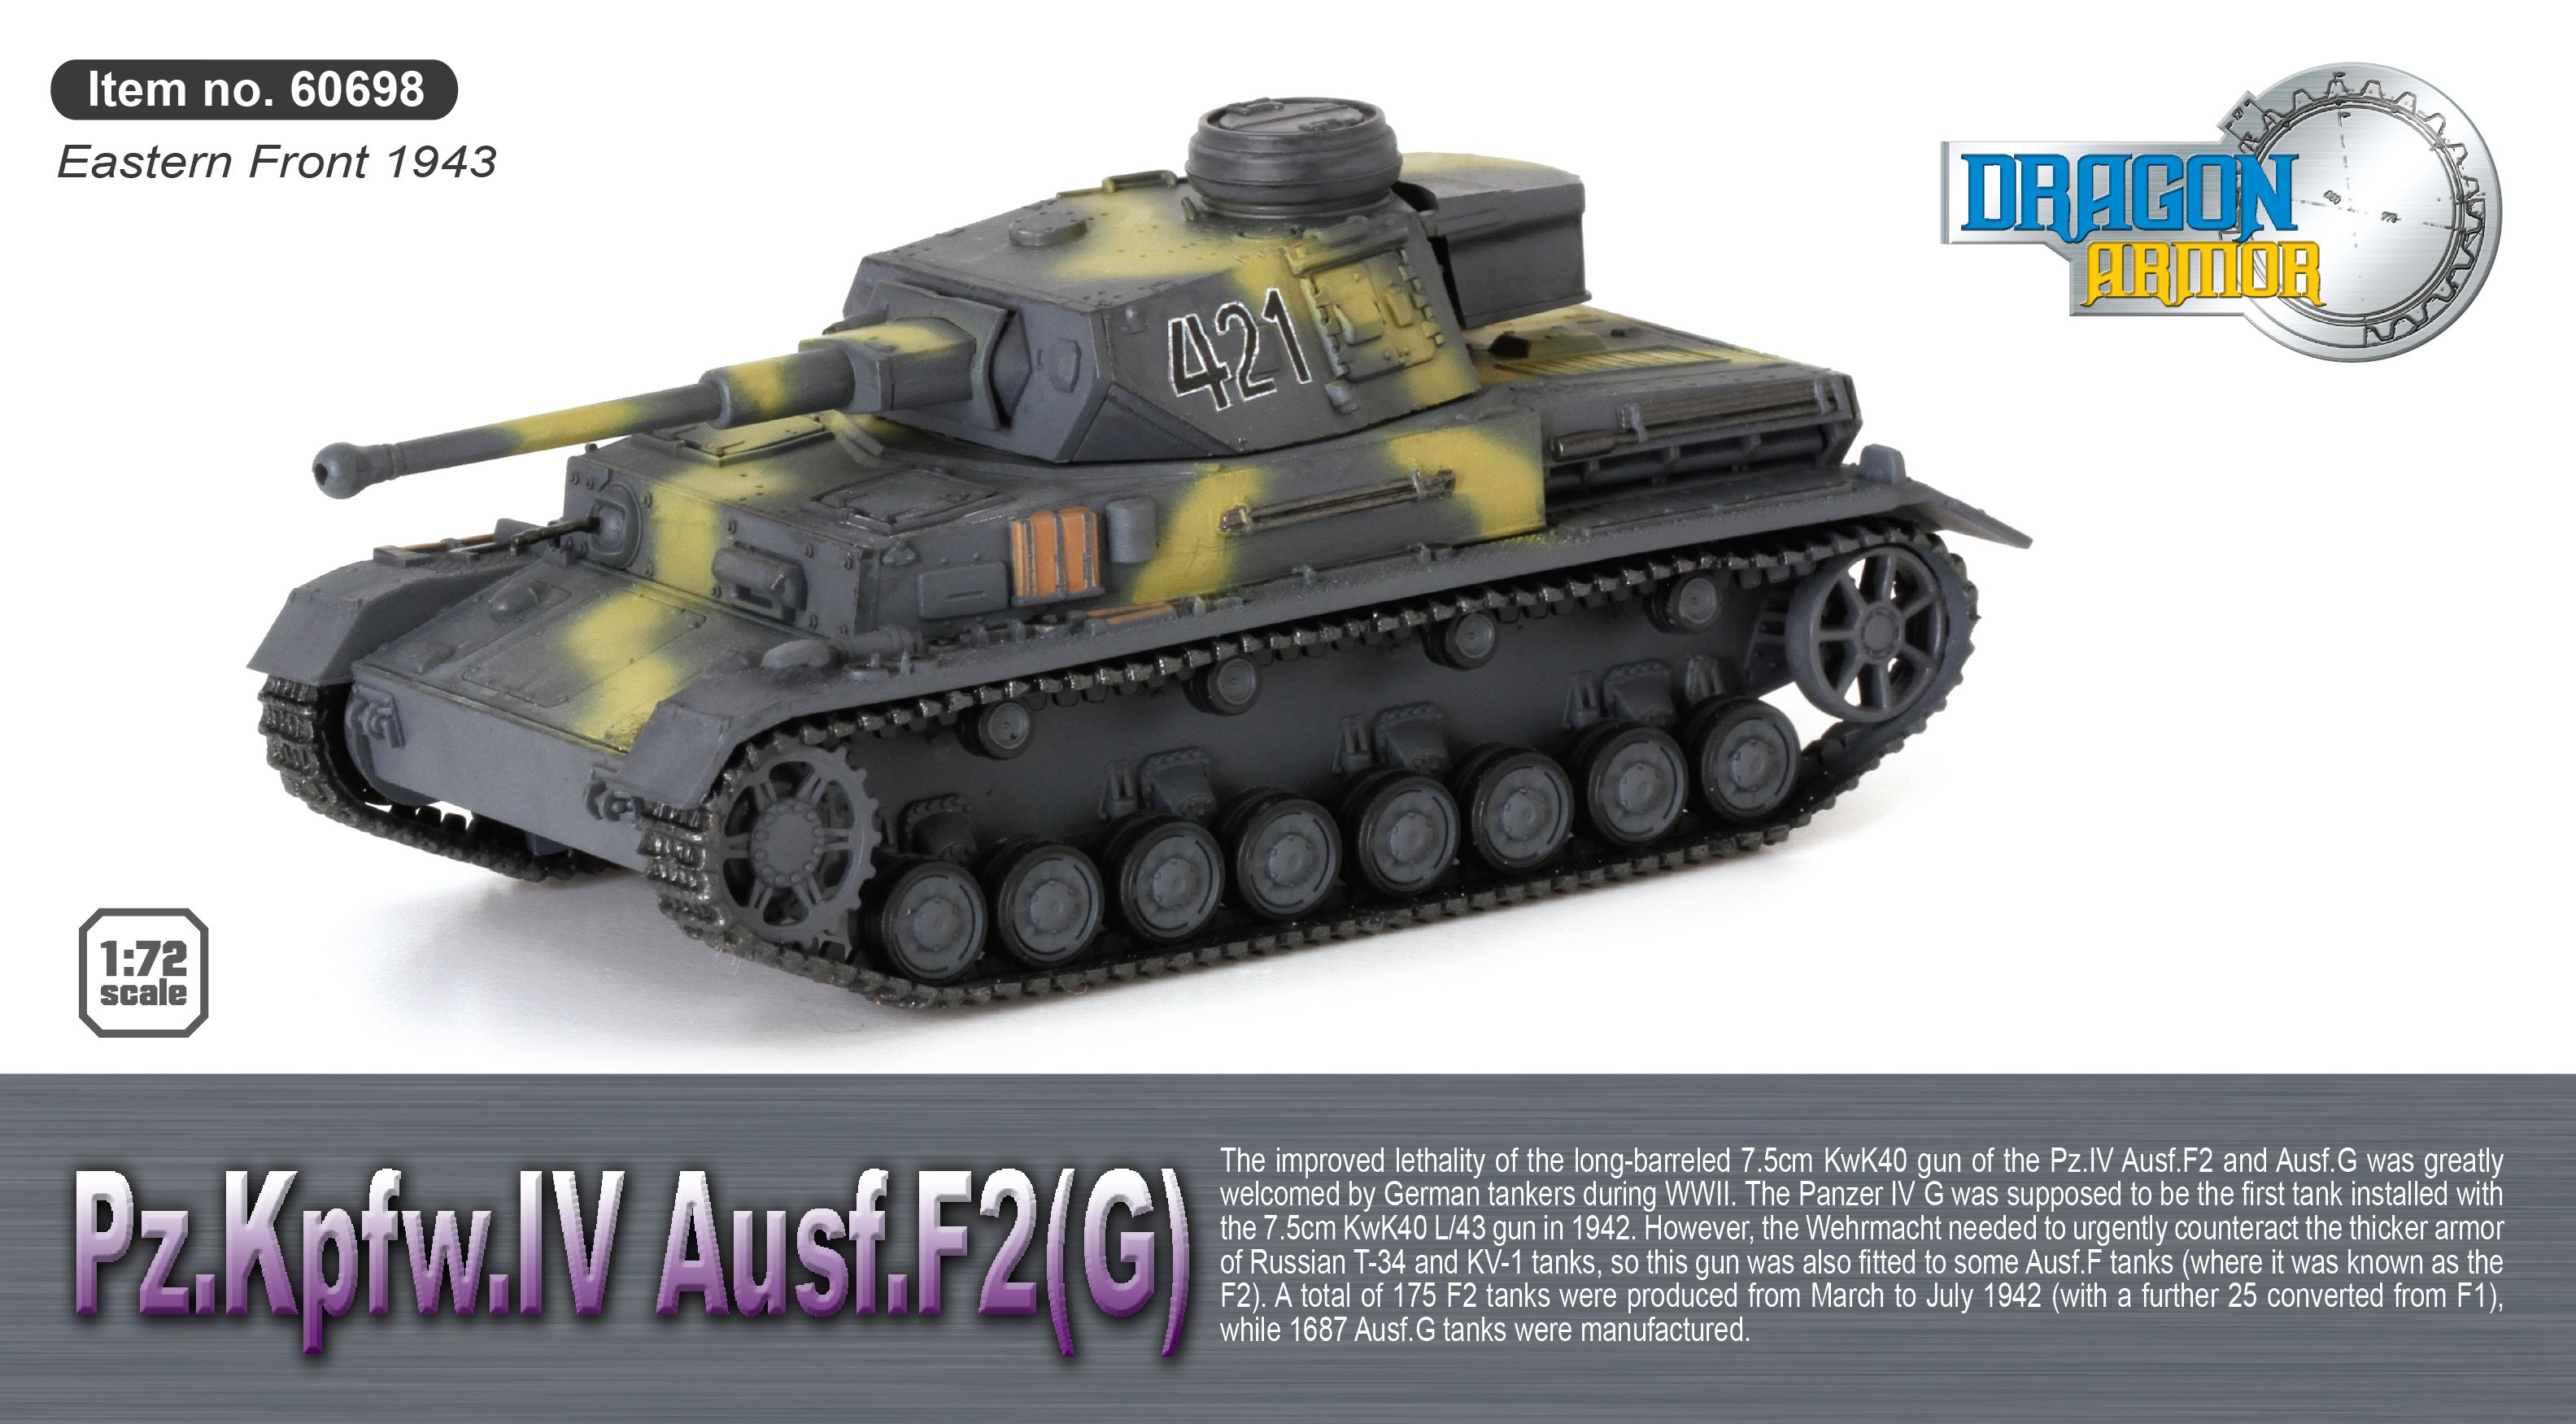 1/72 DRAGON ARMOR 60698 PANZER IV Ausf.F2 G EASTERN FRONT 1943 TANK NEW RELEASE 